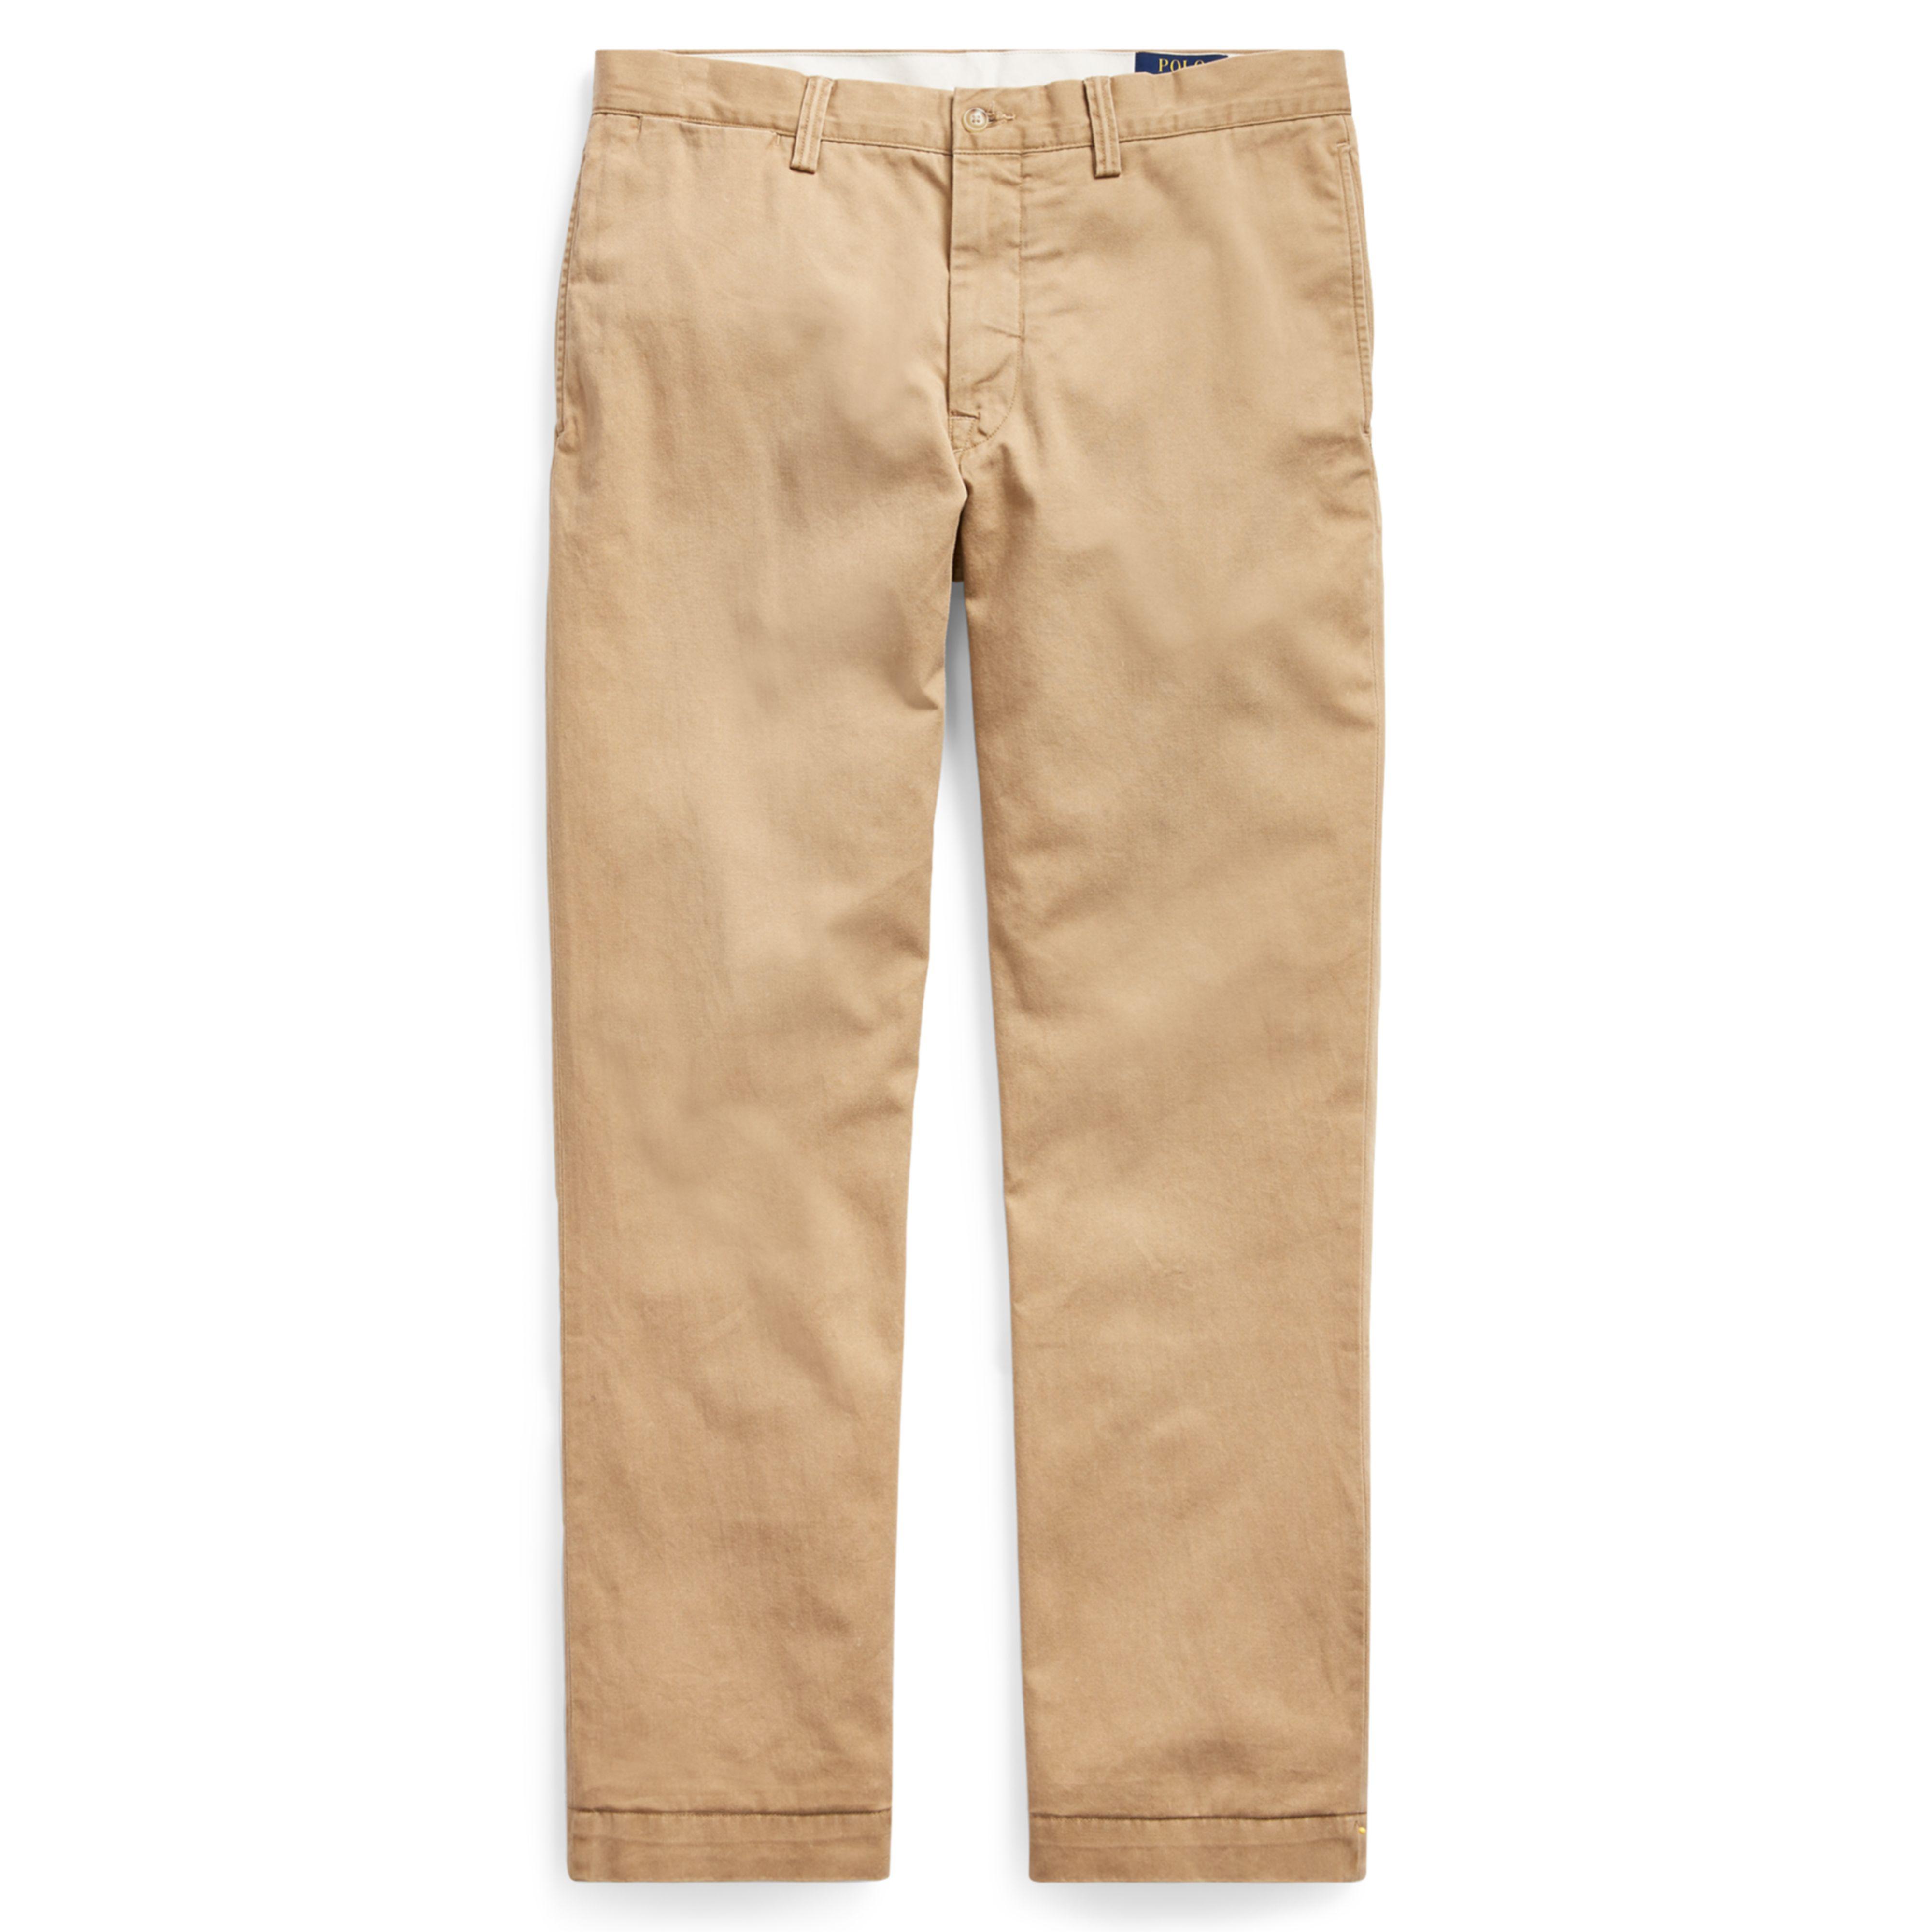 Lyst - Polo Ralph Lauren Classic Fit Cotton Chino for Men